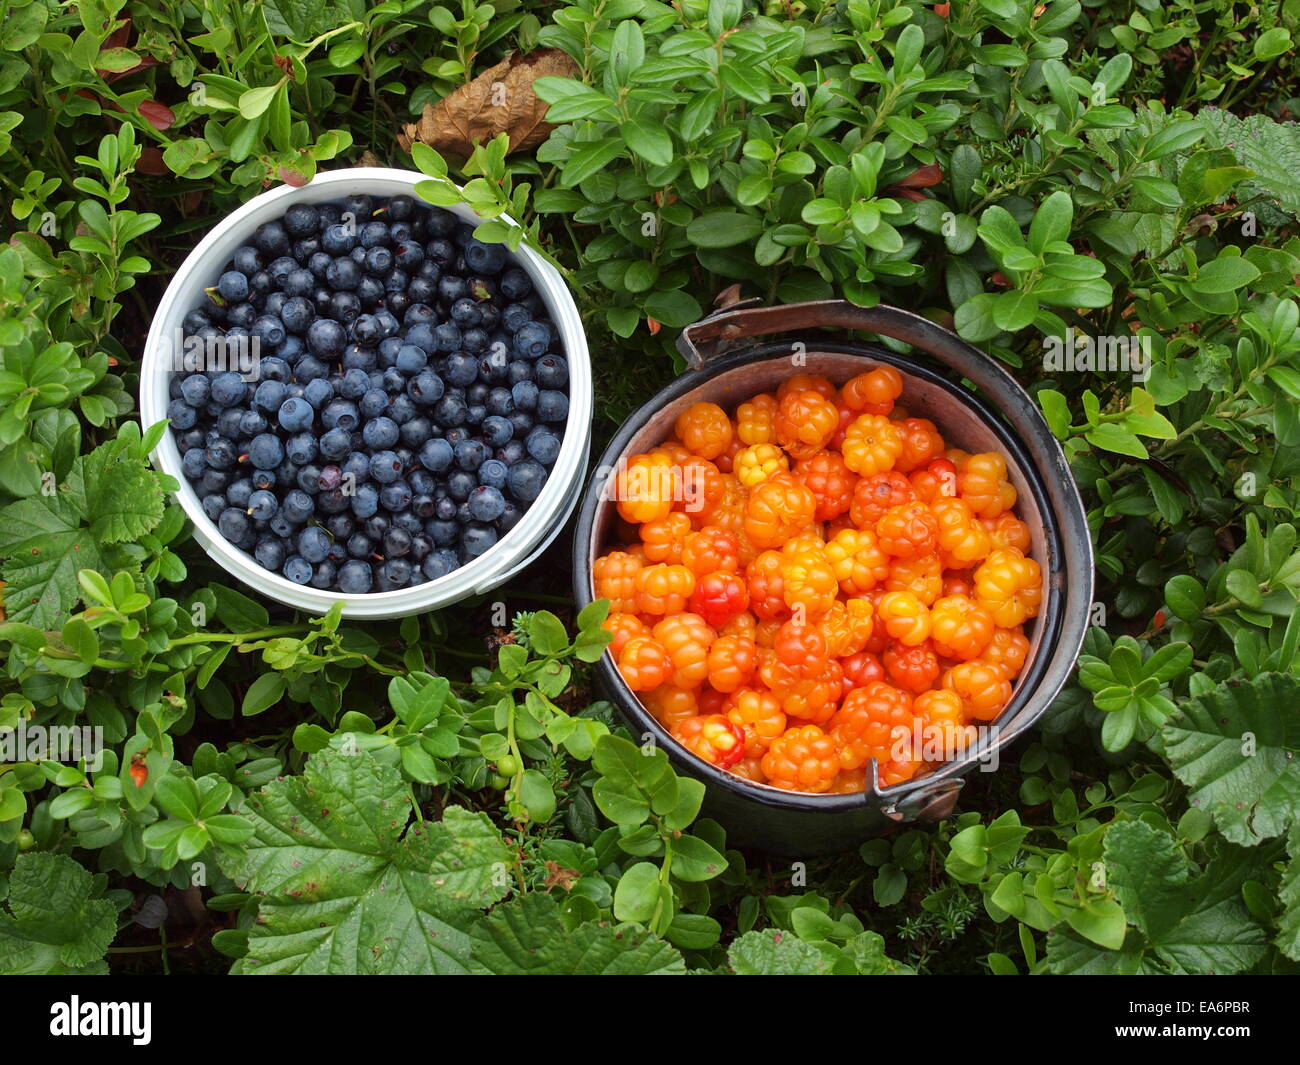 Cloud berry, nordic berry, blueberry Stock Photo - Alamy